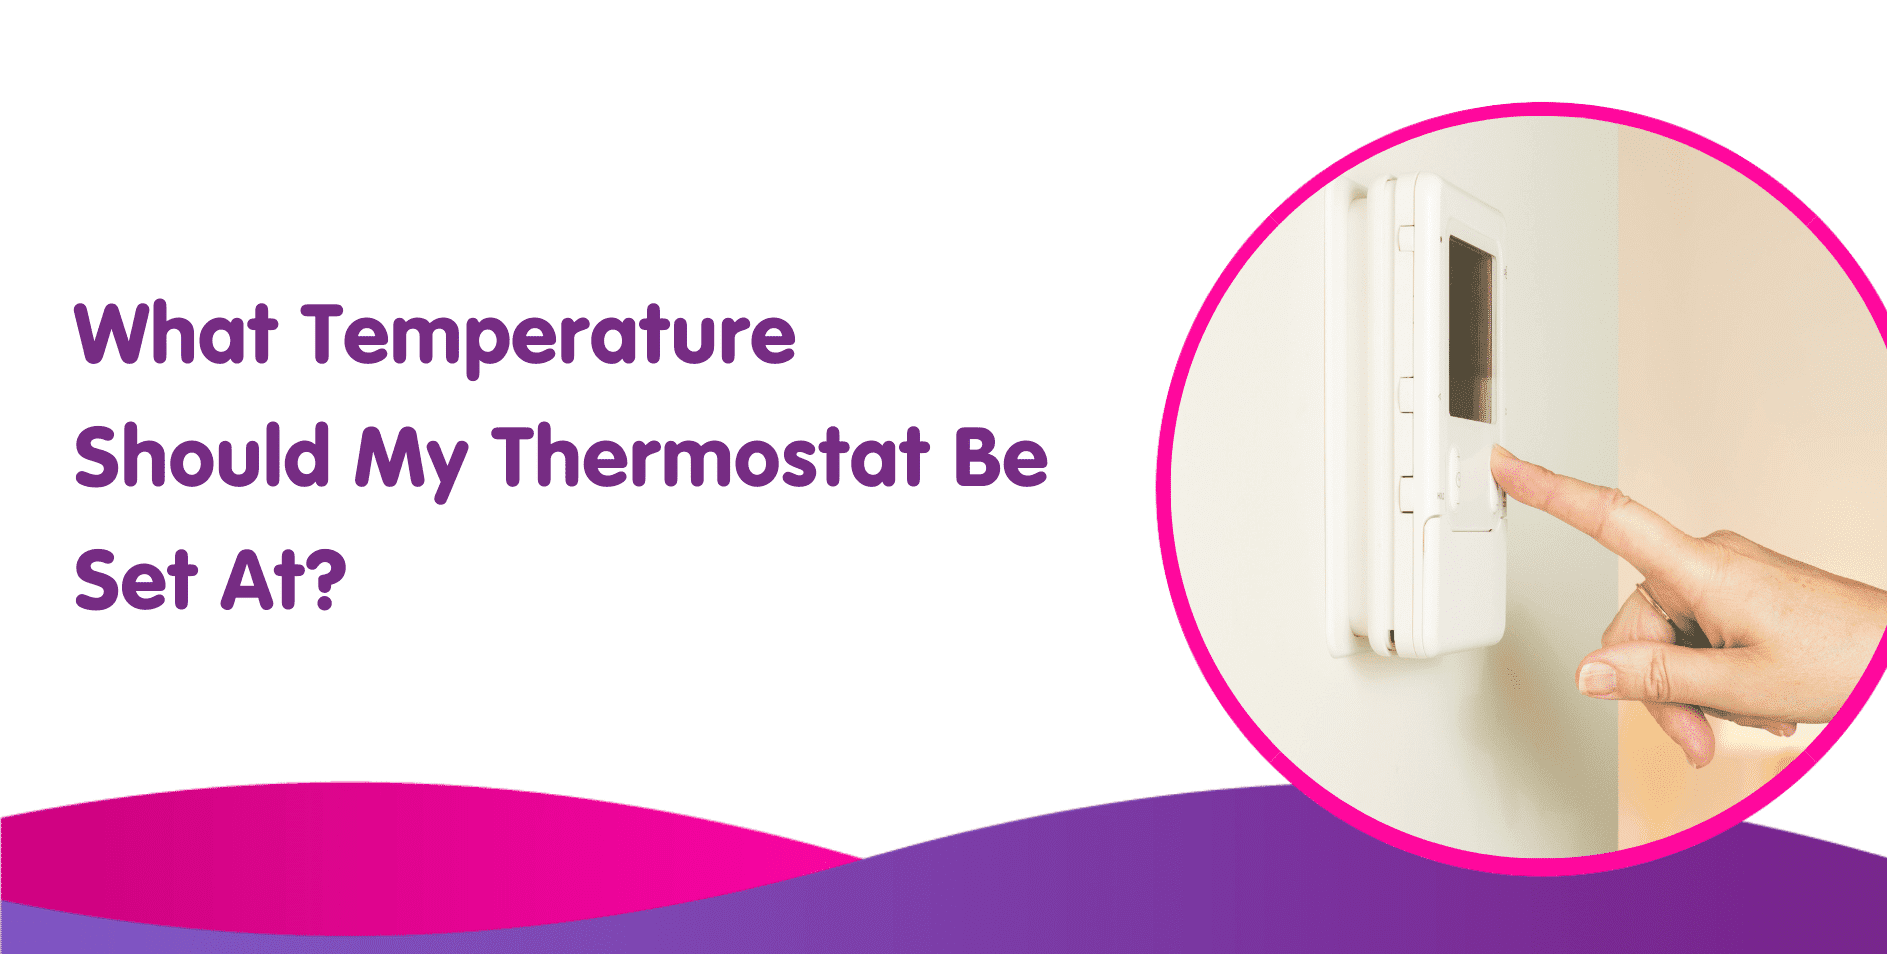 What Temperature Should My Thermostat Be Set At